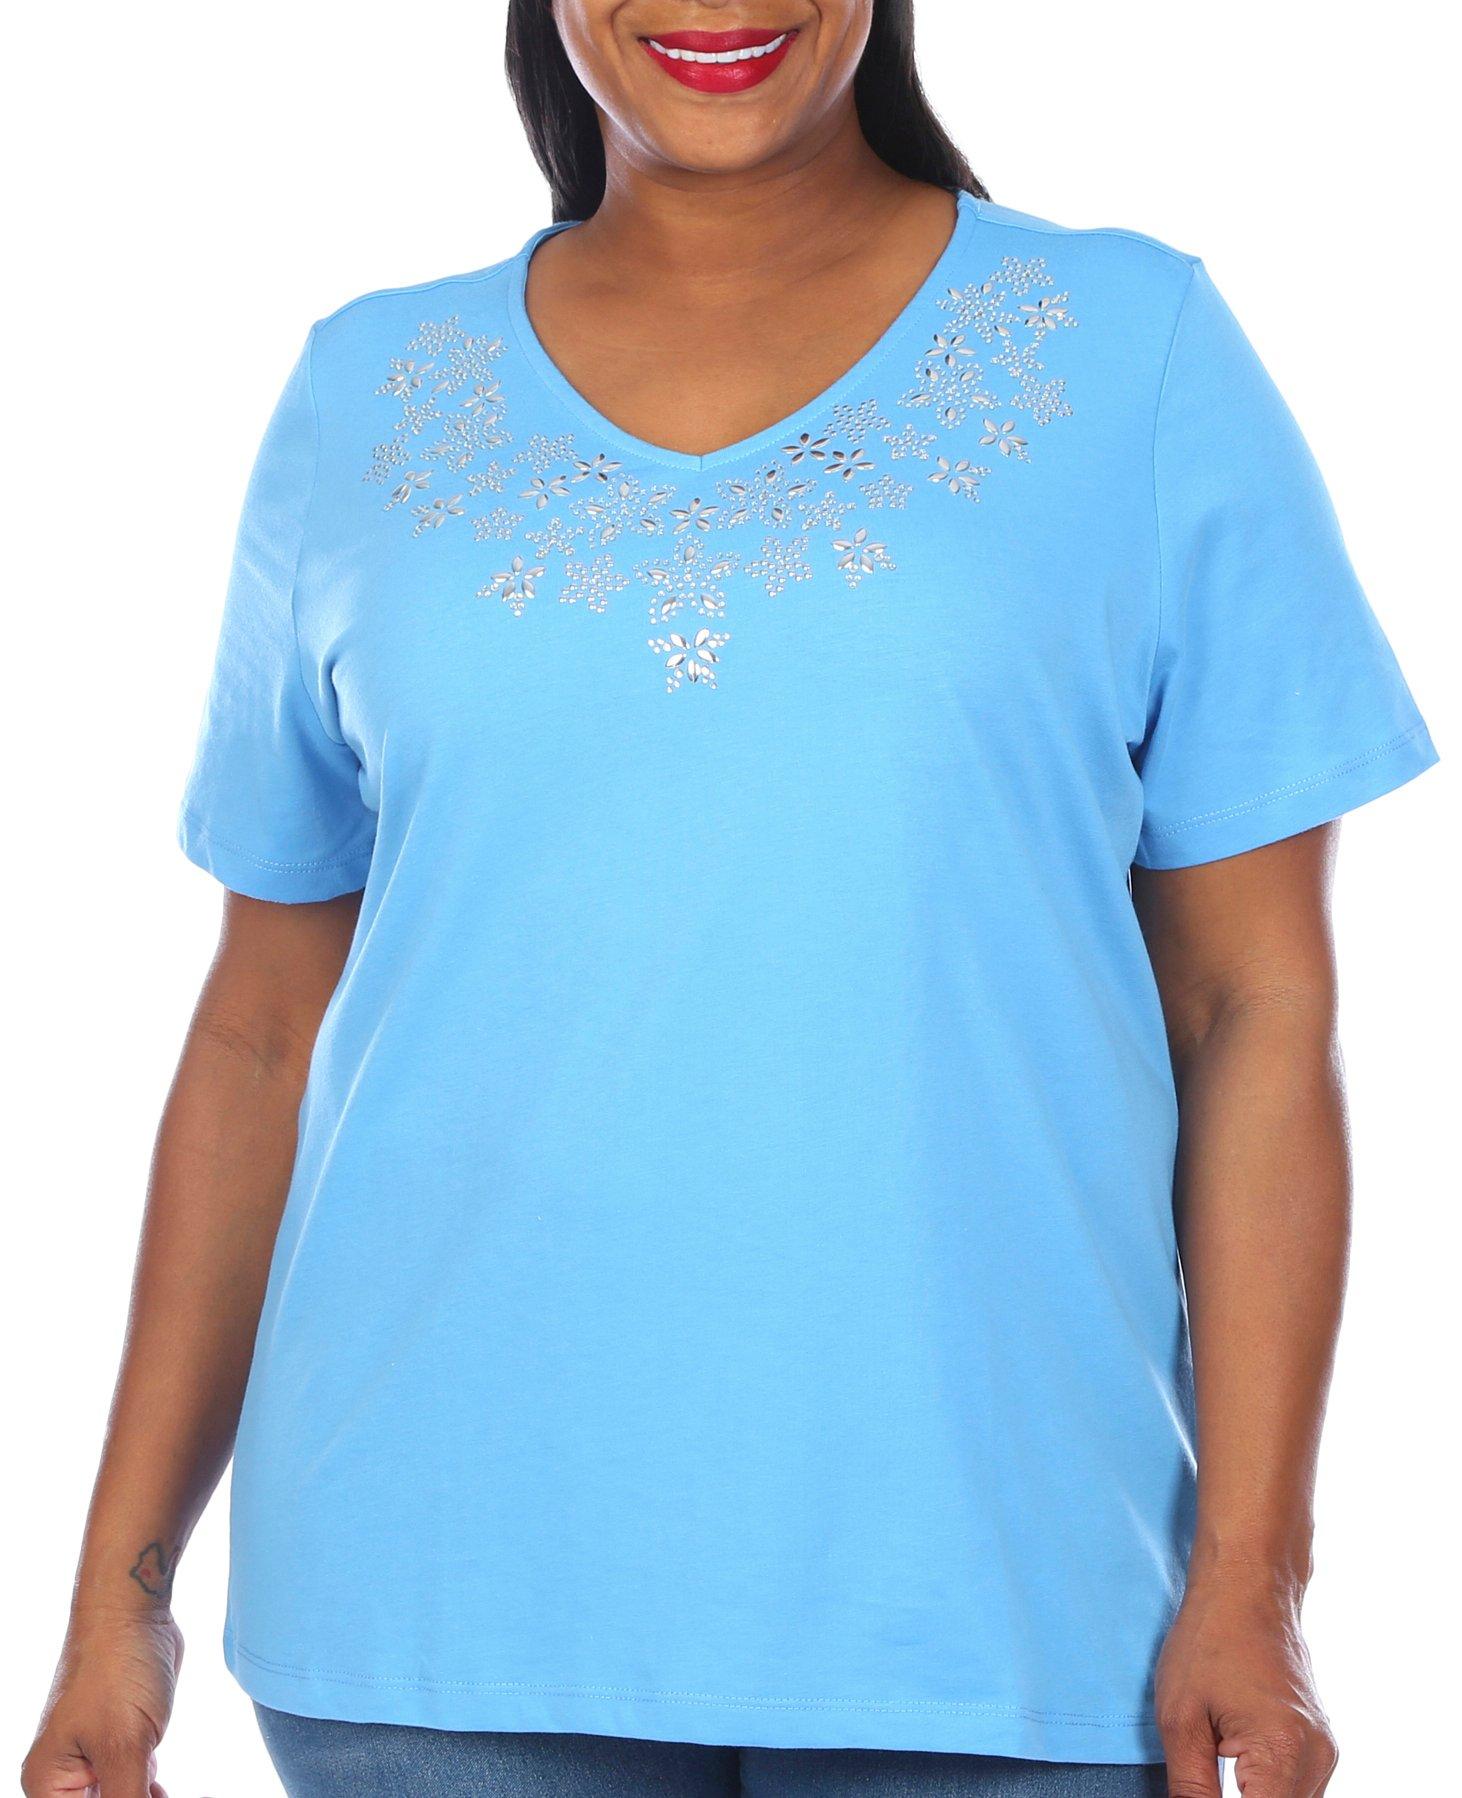 Coral Bay Plus Solid Jeweled V Neck Short Sleeve Top